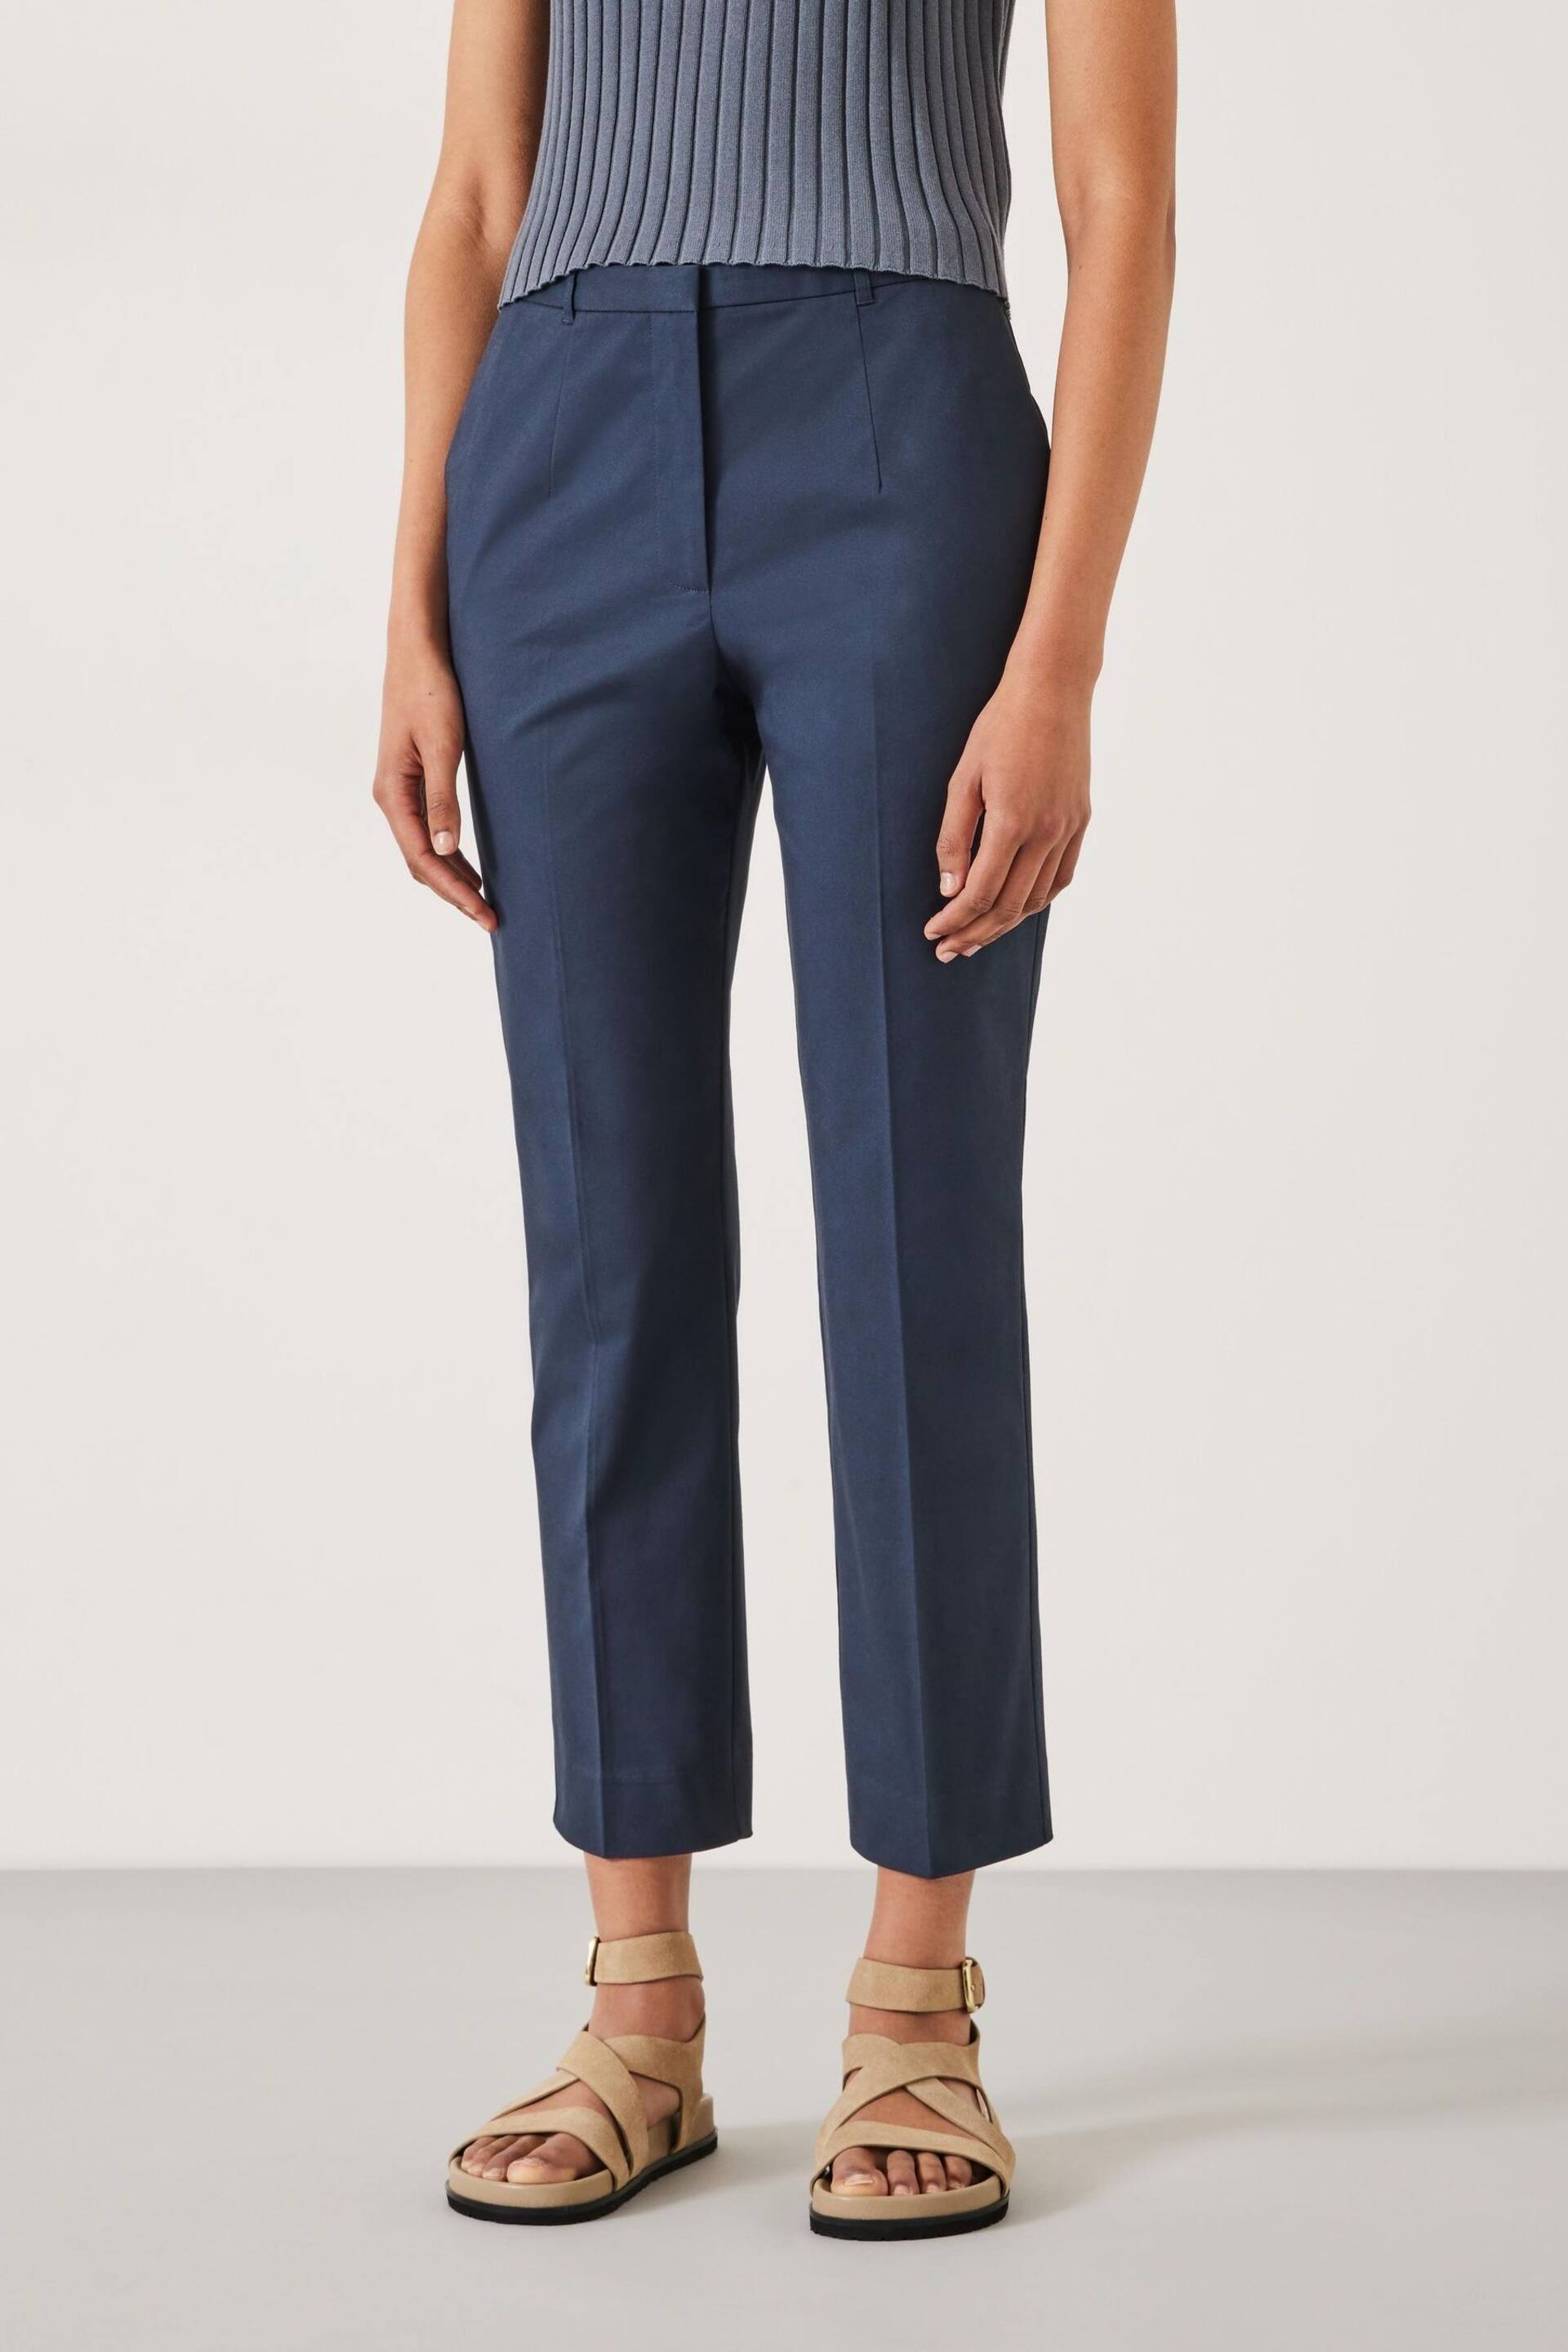 Hush Blue Hayes Cigarette Trousers - Image 1 of 5